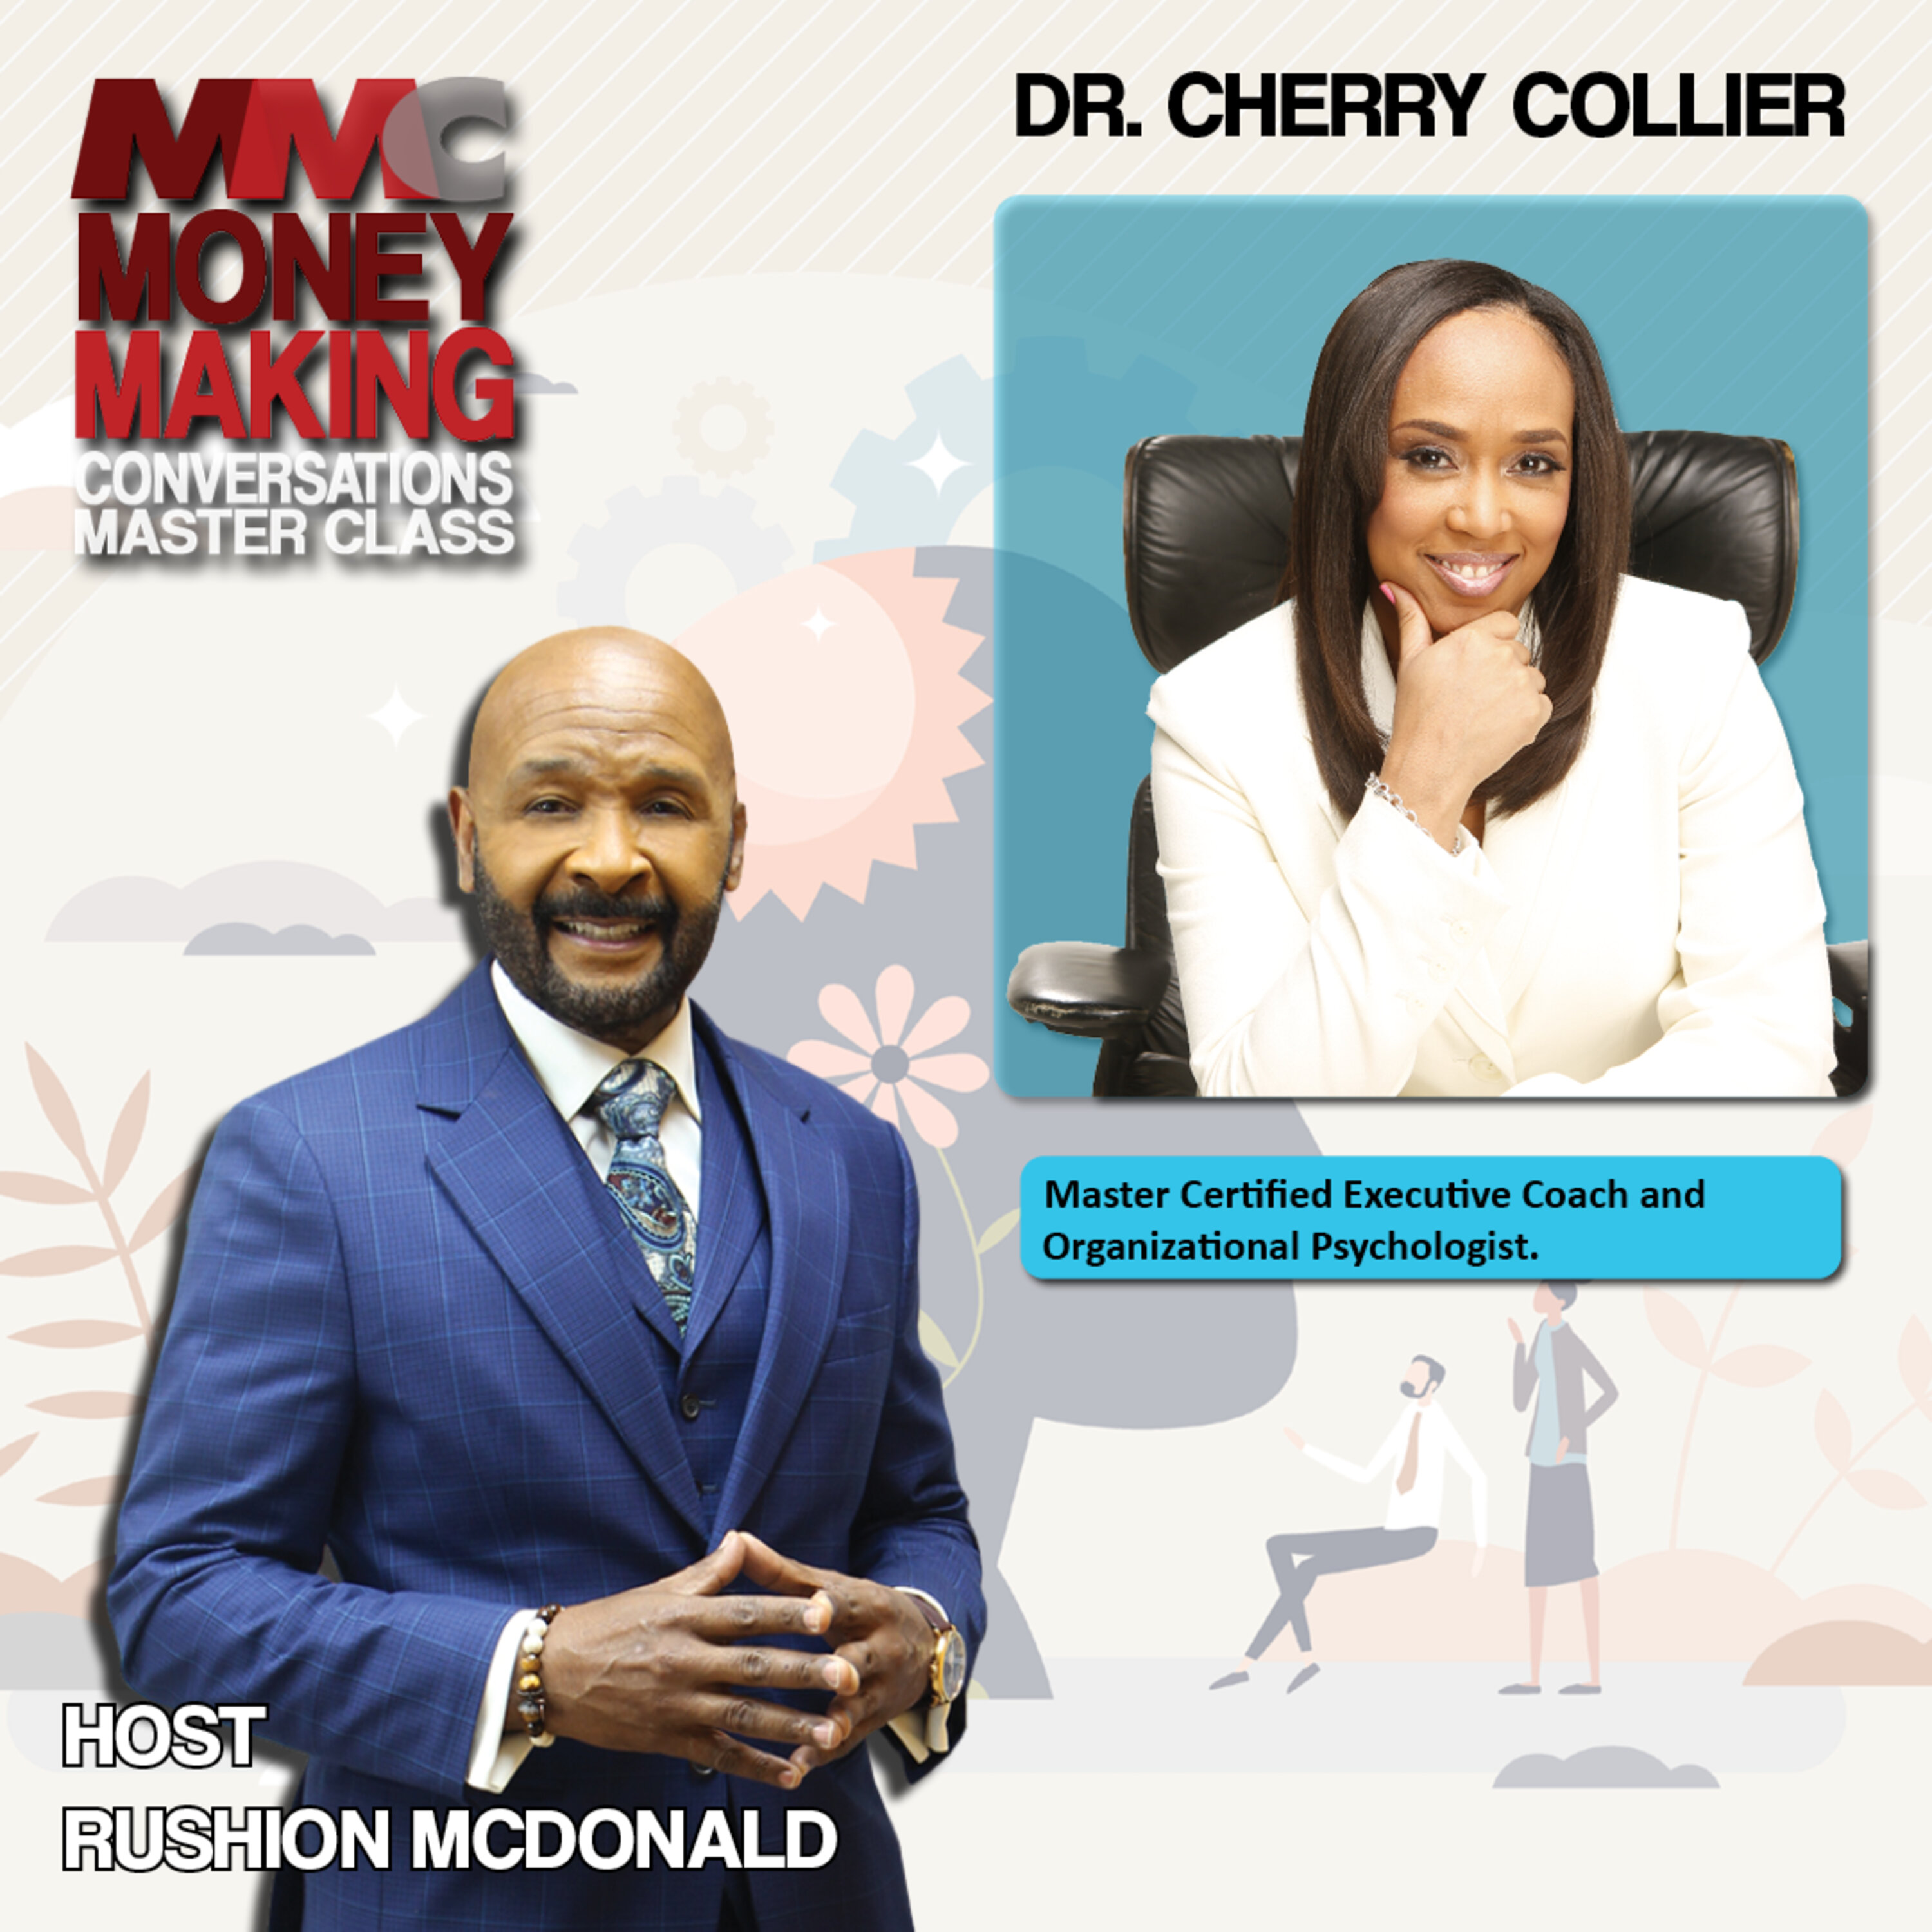 Personality Matters CEO, Dr. Cherry Collier, Master Certified Executive Coach and Organizational Psychologist.